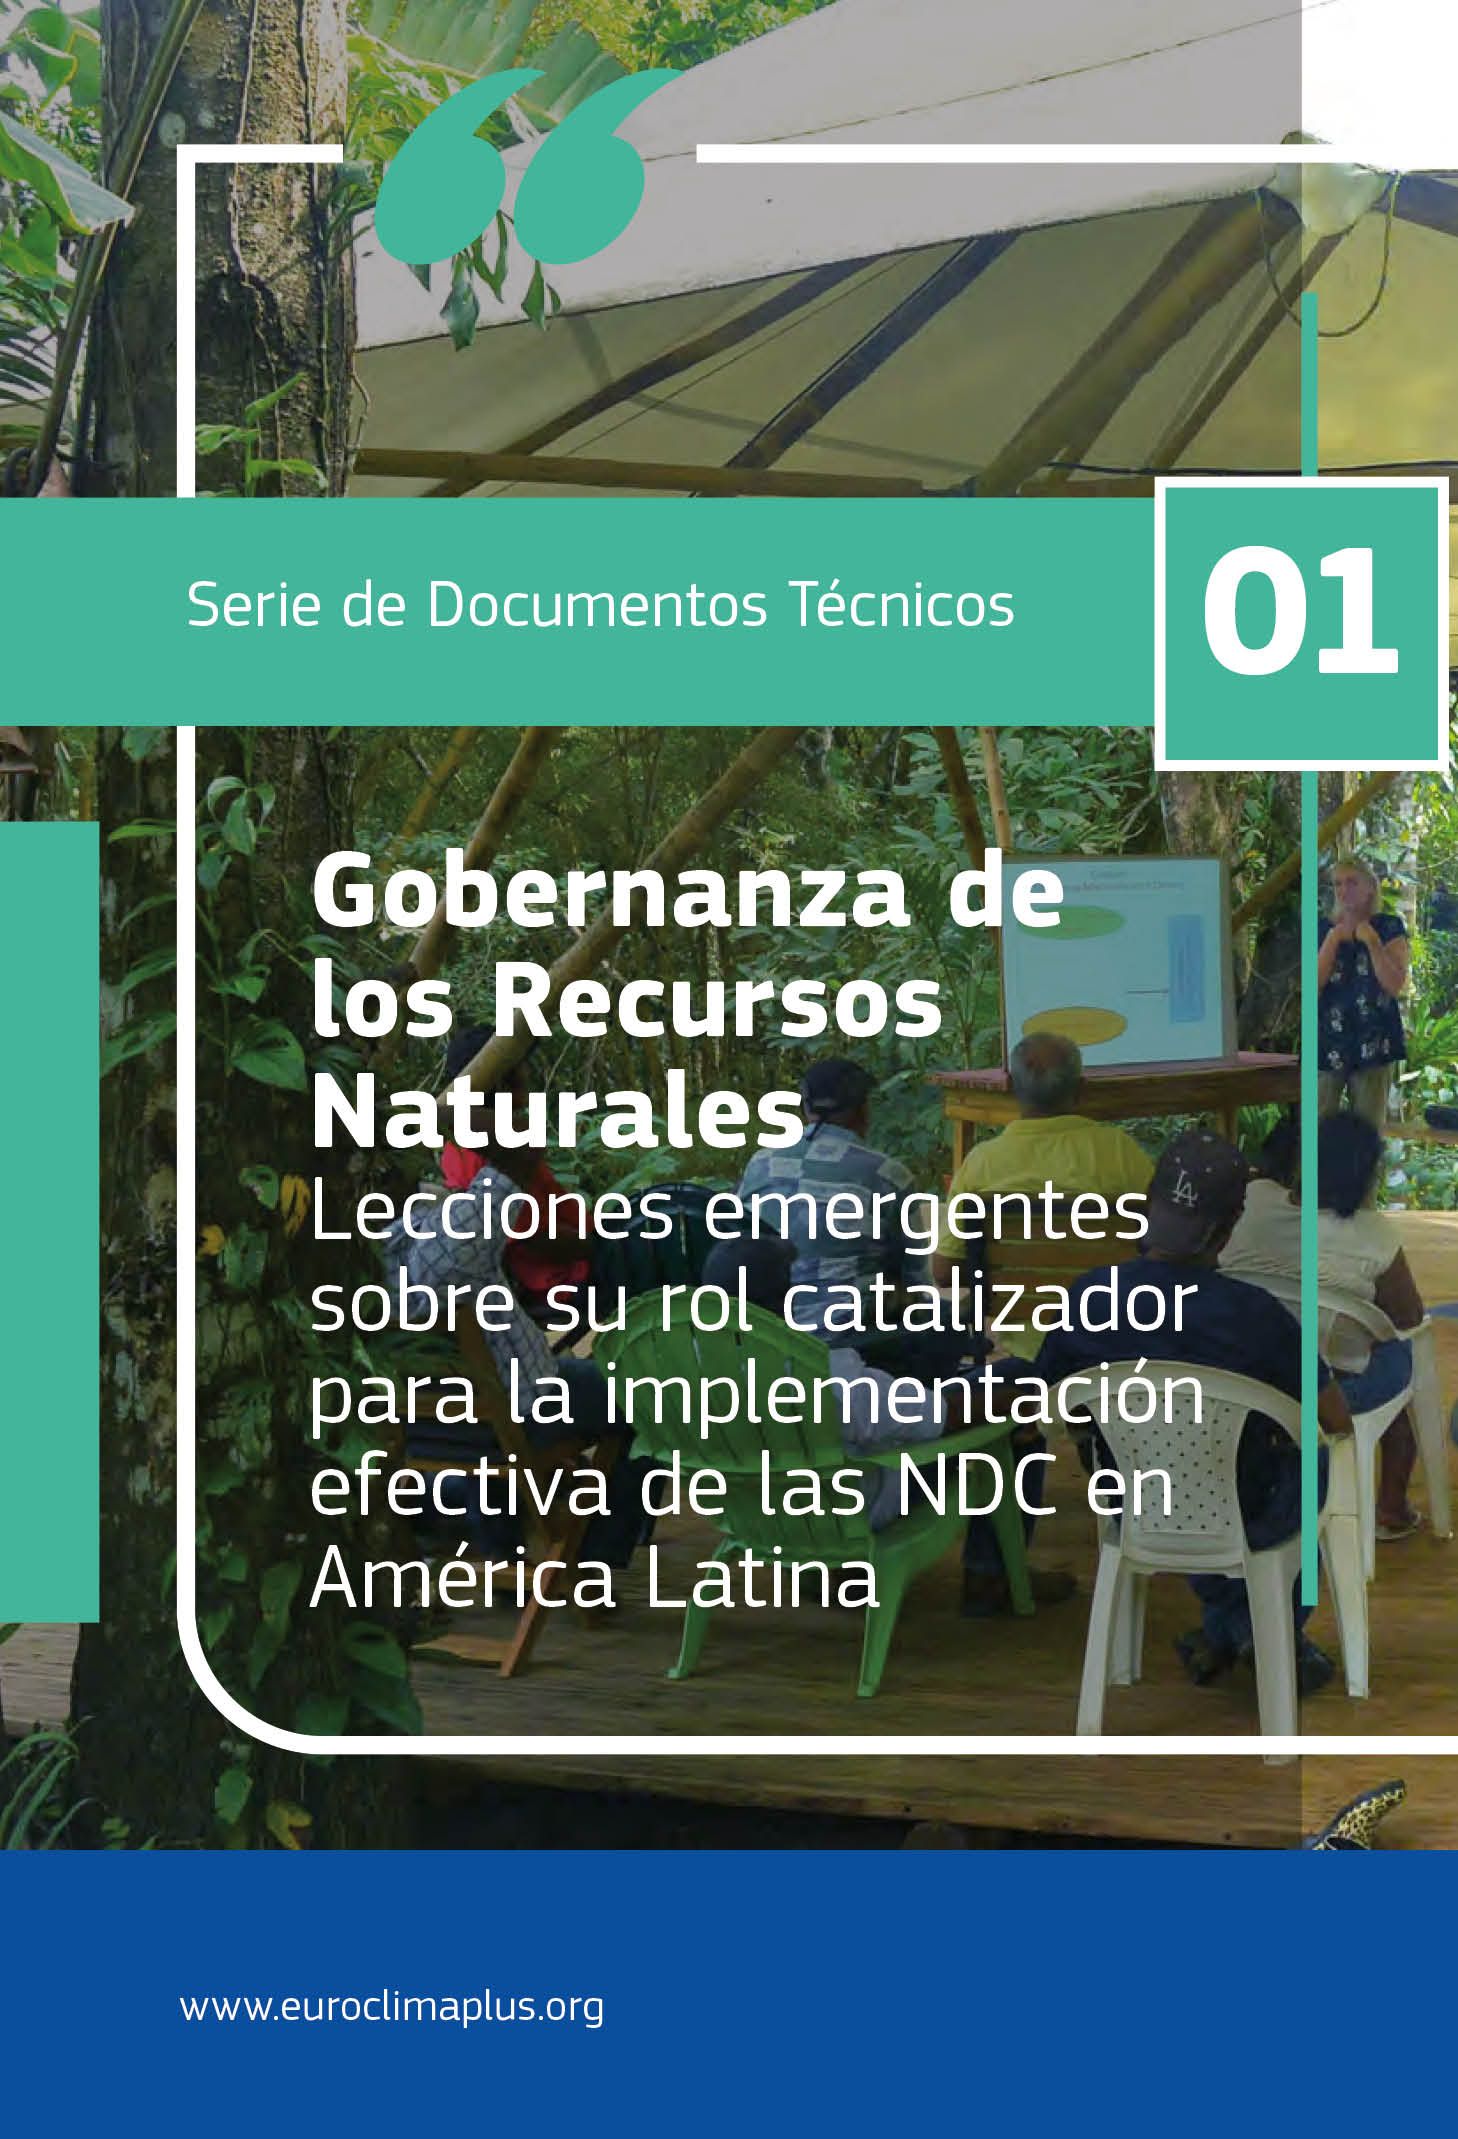 Natural Resource Governance Emerging lessons on its catalytic role for the effective implementation of NDCs in Latin America